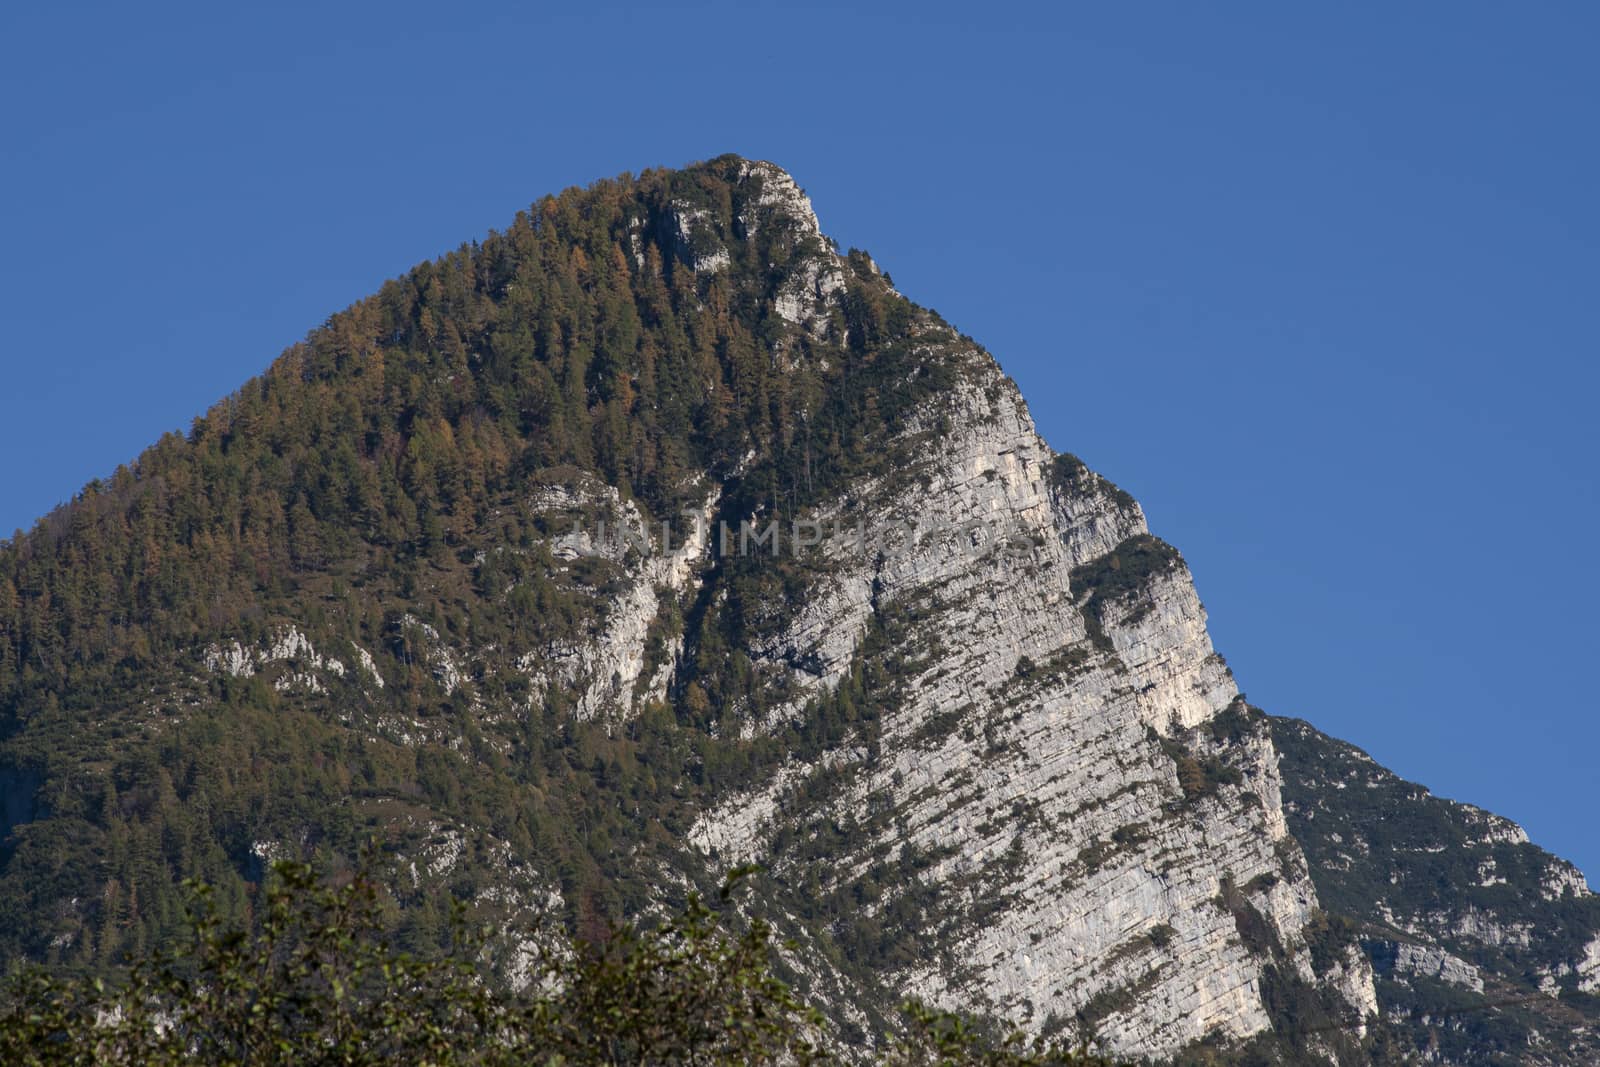 Mountain detail on Dolomites during day time in autumn